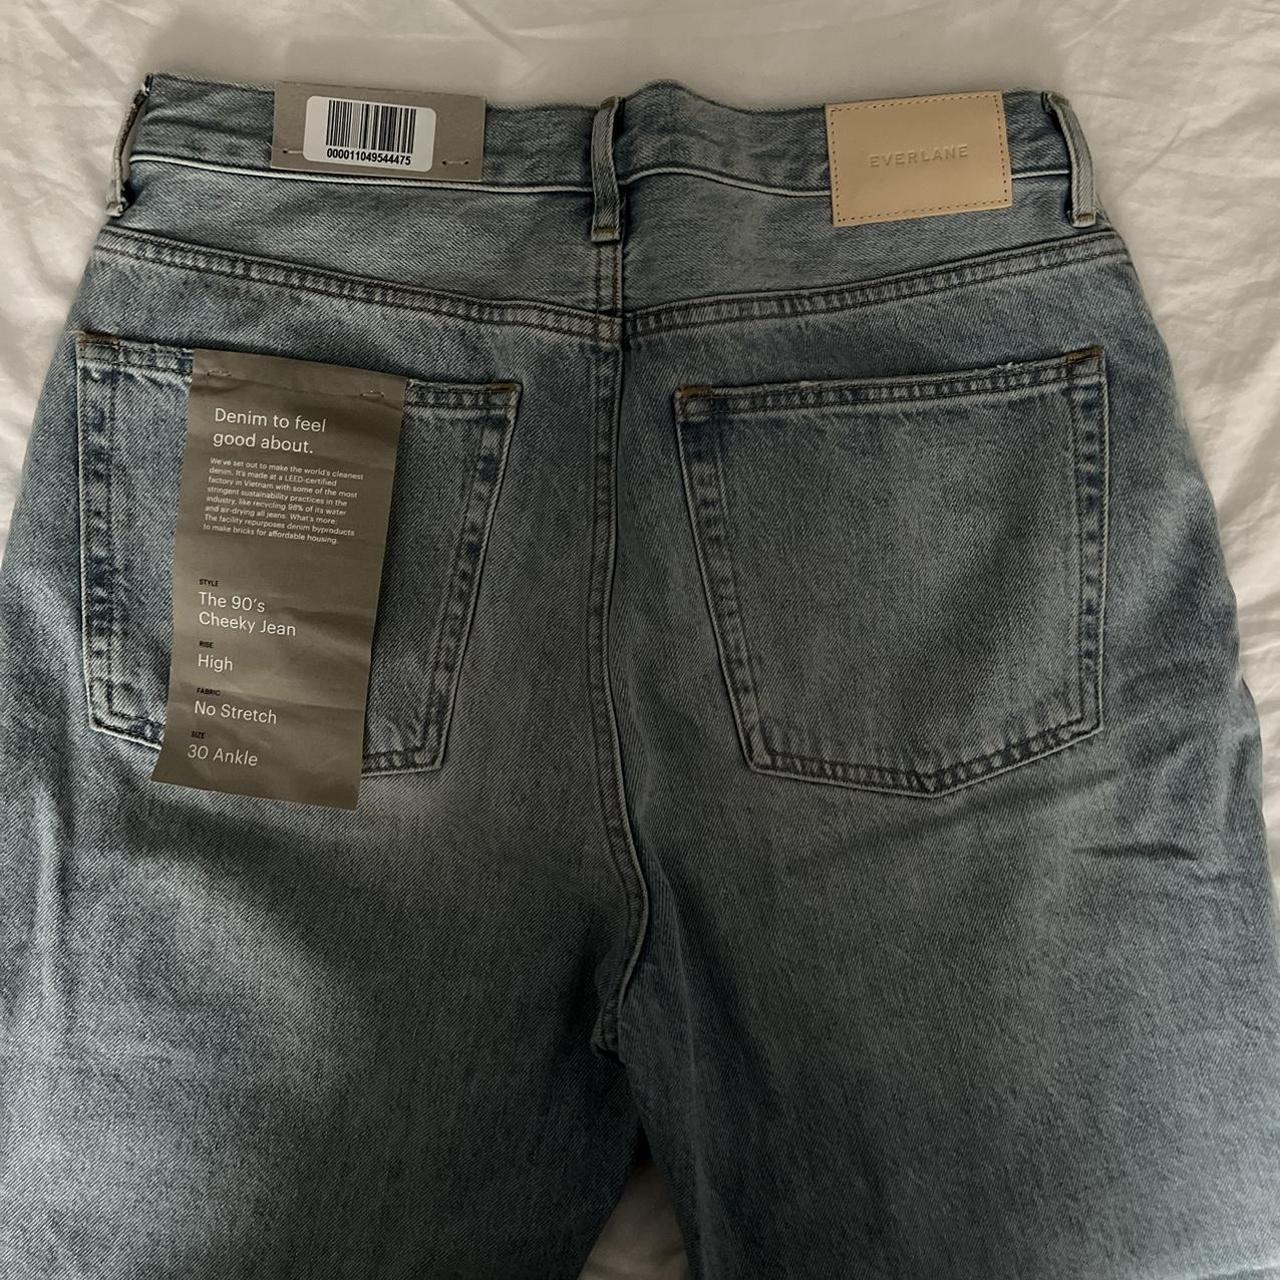 Everlane The ’90s Cheeky Jean in patched blue... - Depop